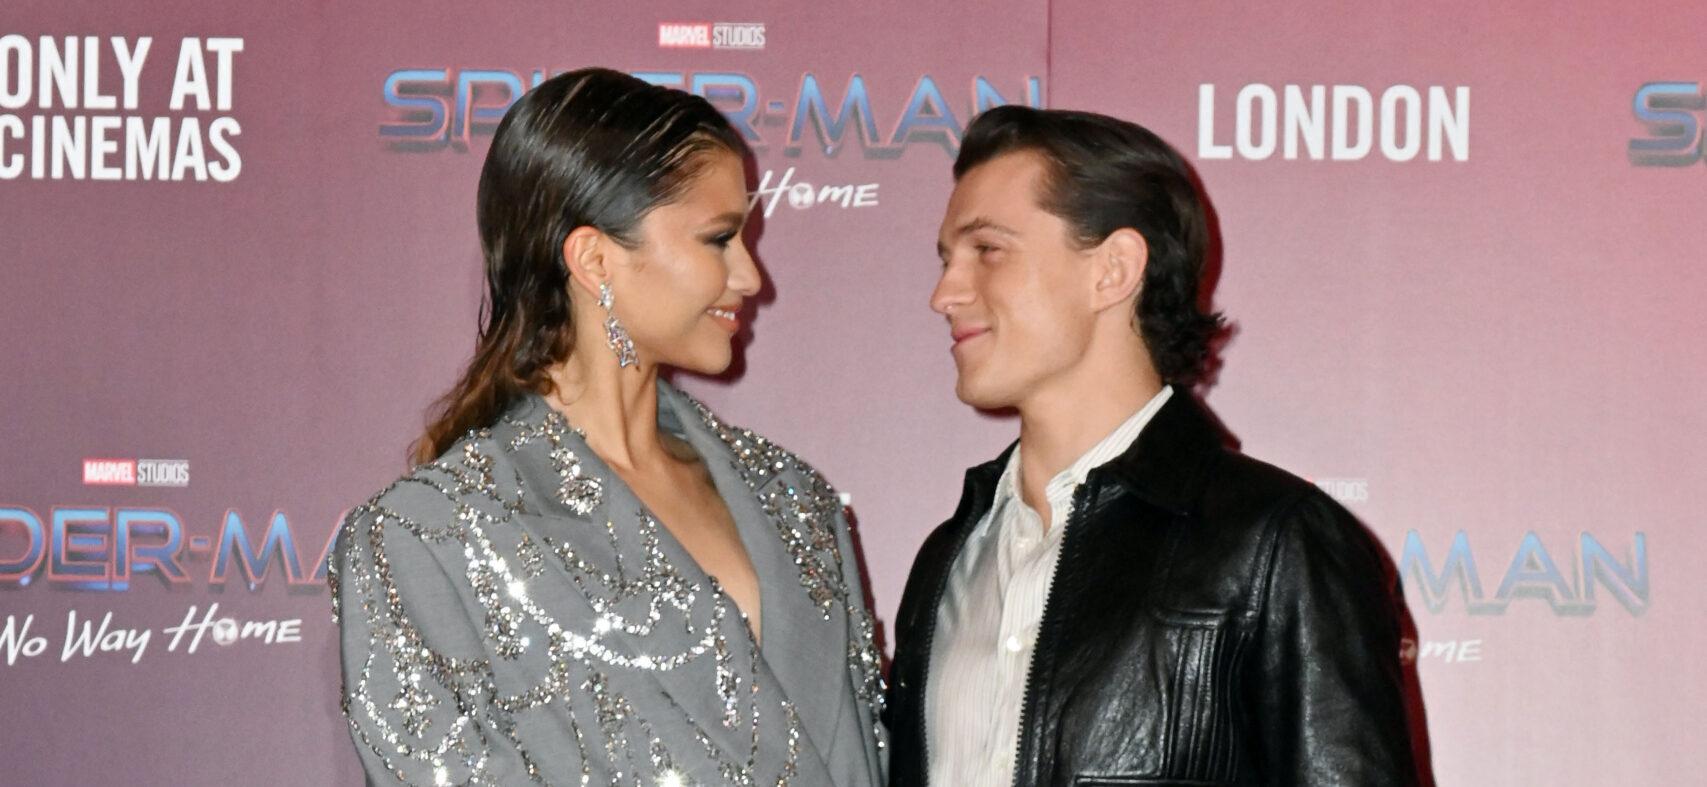 Tom Holland Gets Candid About Romance With Zendaya, Says It’s ‘Worth Its Weight In Gold’